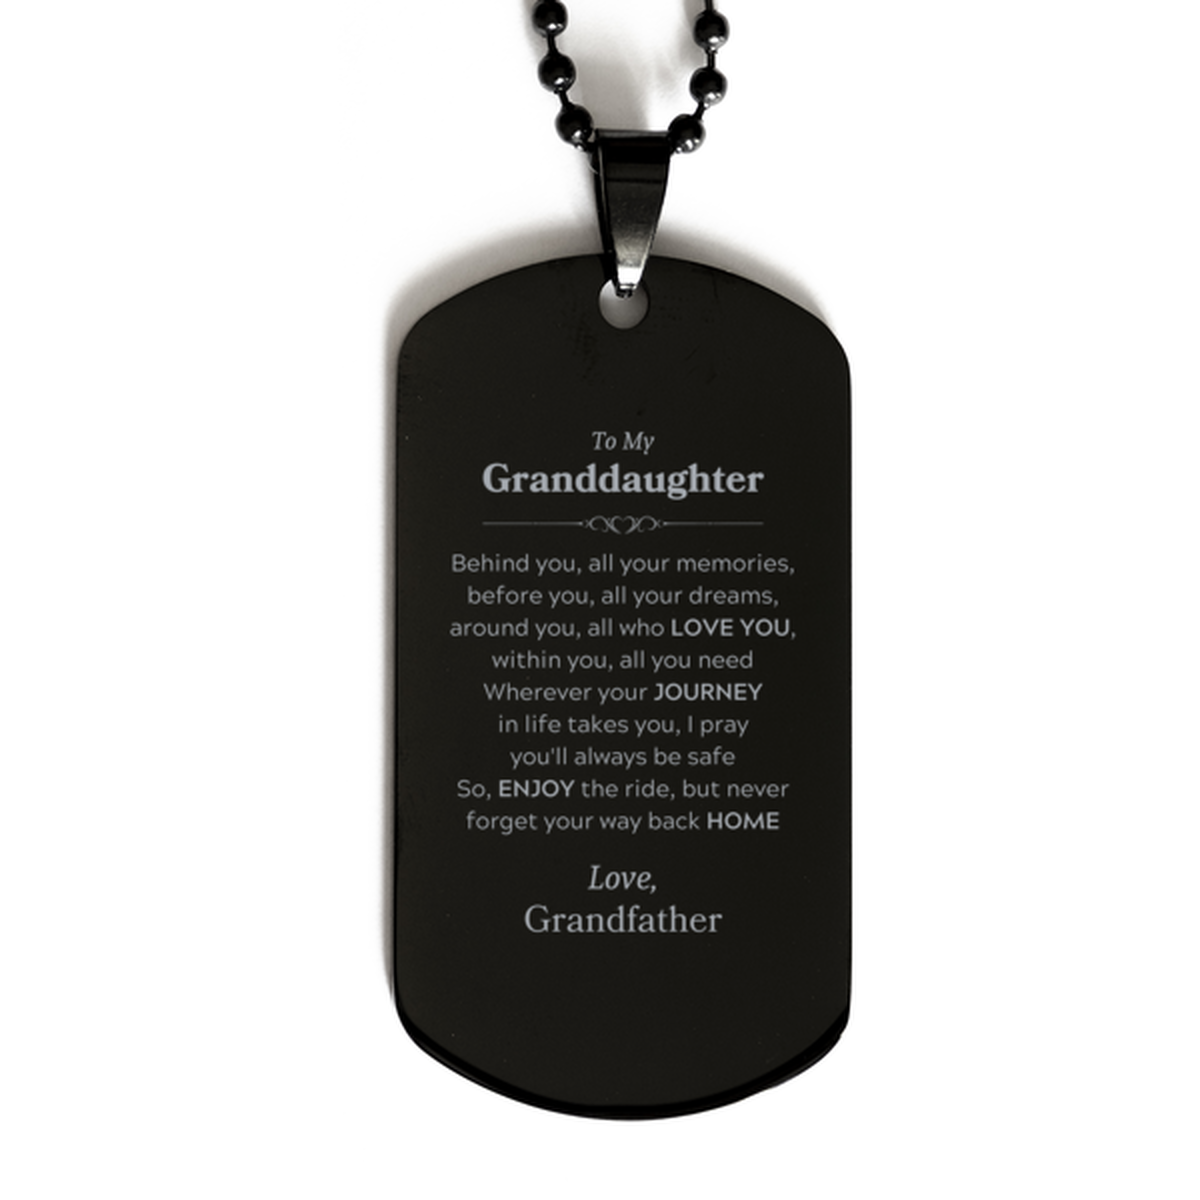 To My Granddaughter Graduation Gifts from Grandfather, Granddaughter Black Dog Tag Christmas Birthday Gifts for Granddaughter Behind you, all your memories, before you, all your dreams. Love, Grandfather